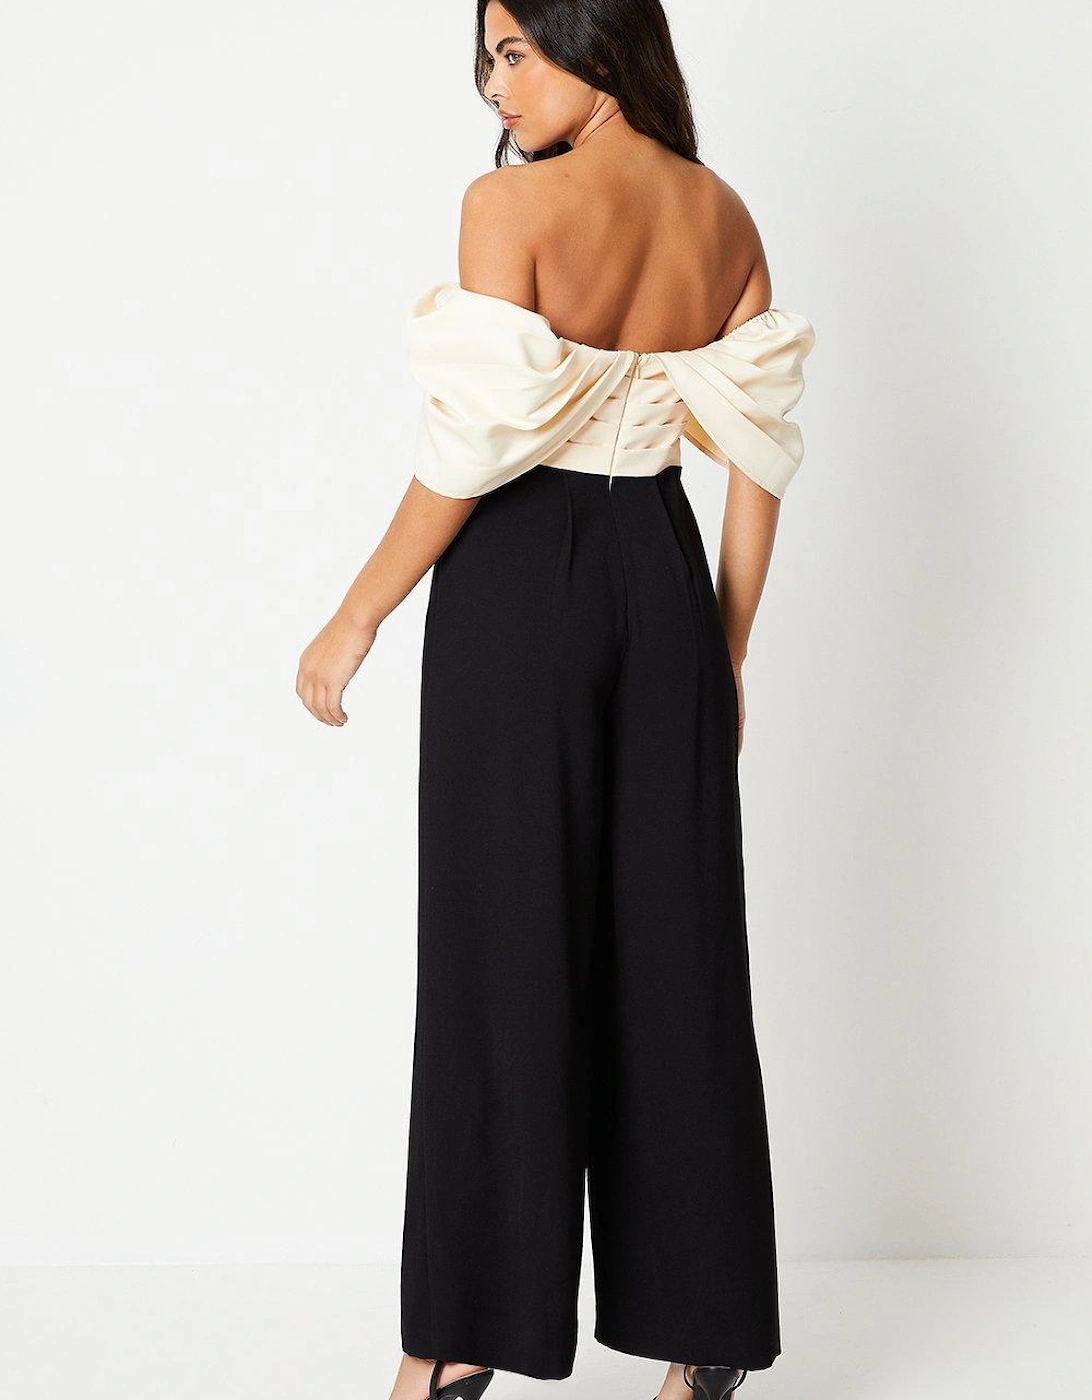 Bardot Jumpsuit With Pleated Bodice